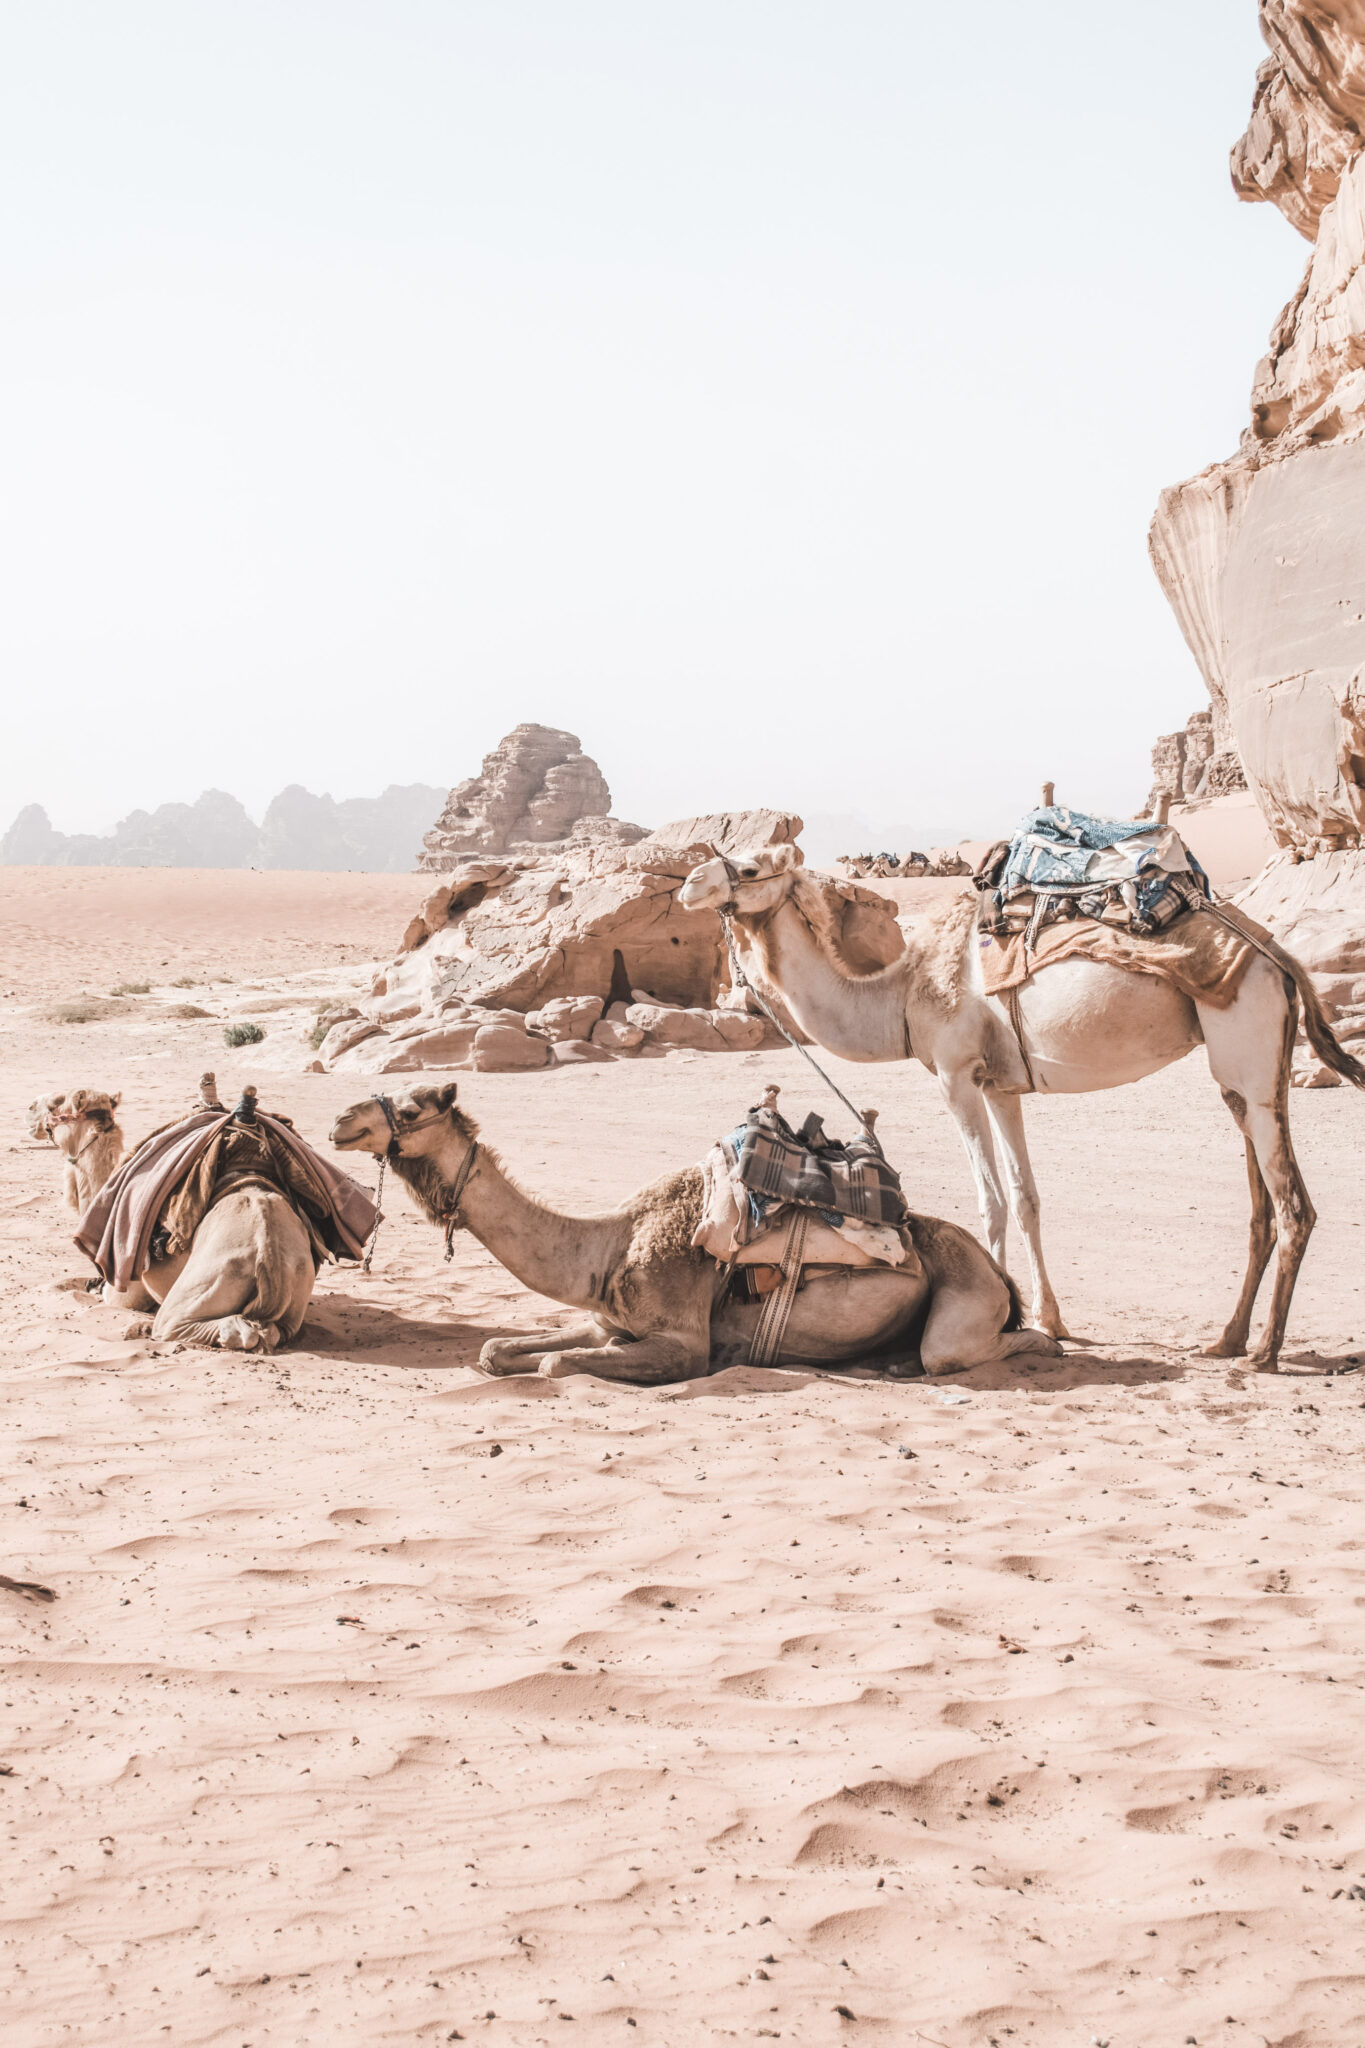 Three camels are seen resting and sitting down in the sands of Jordan. This article covers exploring Jordan.